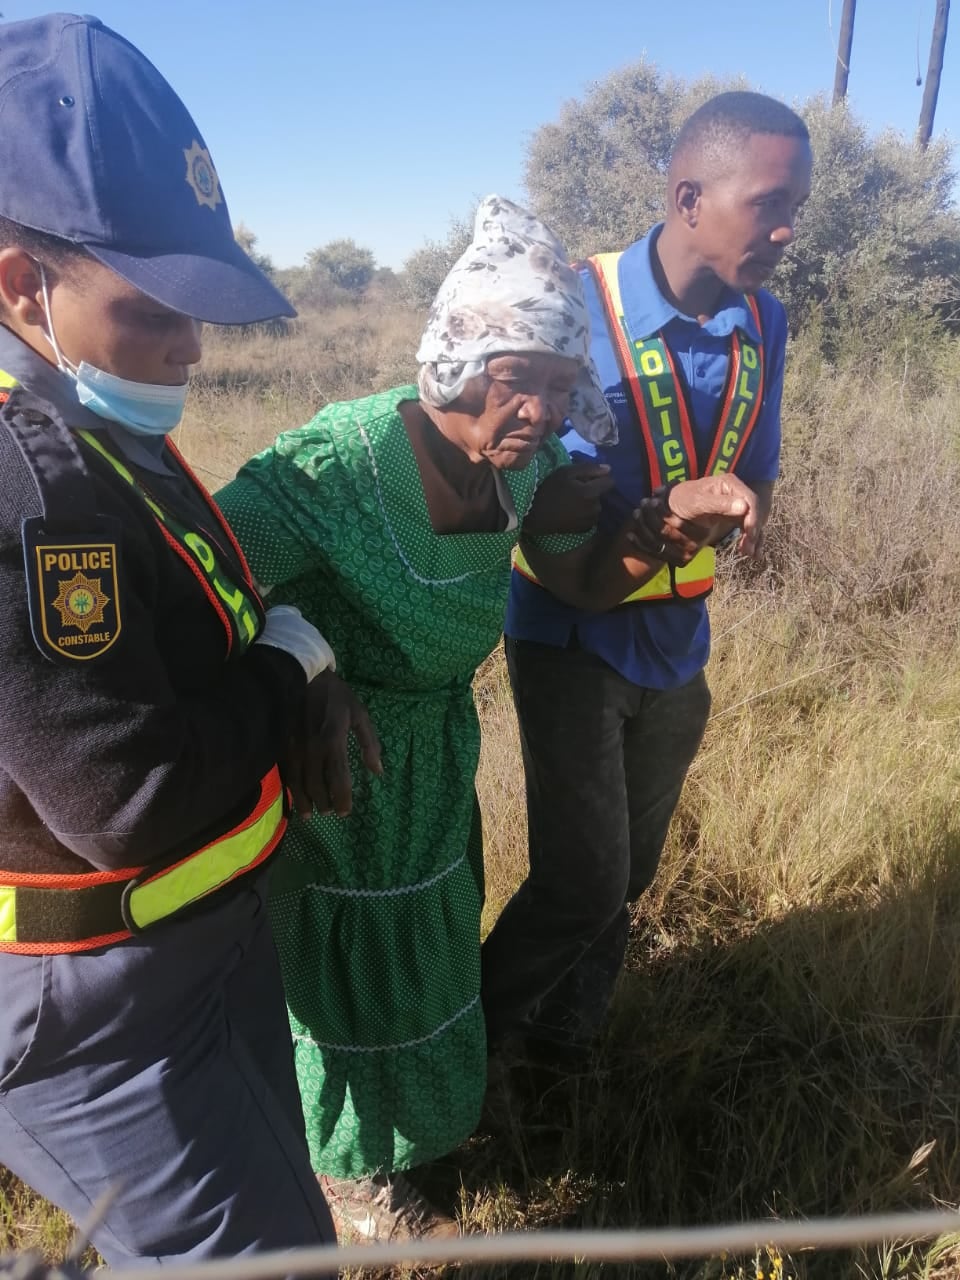 Missing elderly woman found and reunited with family